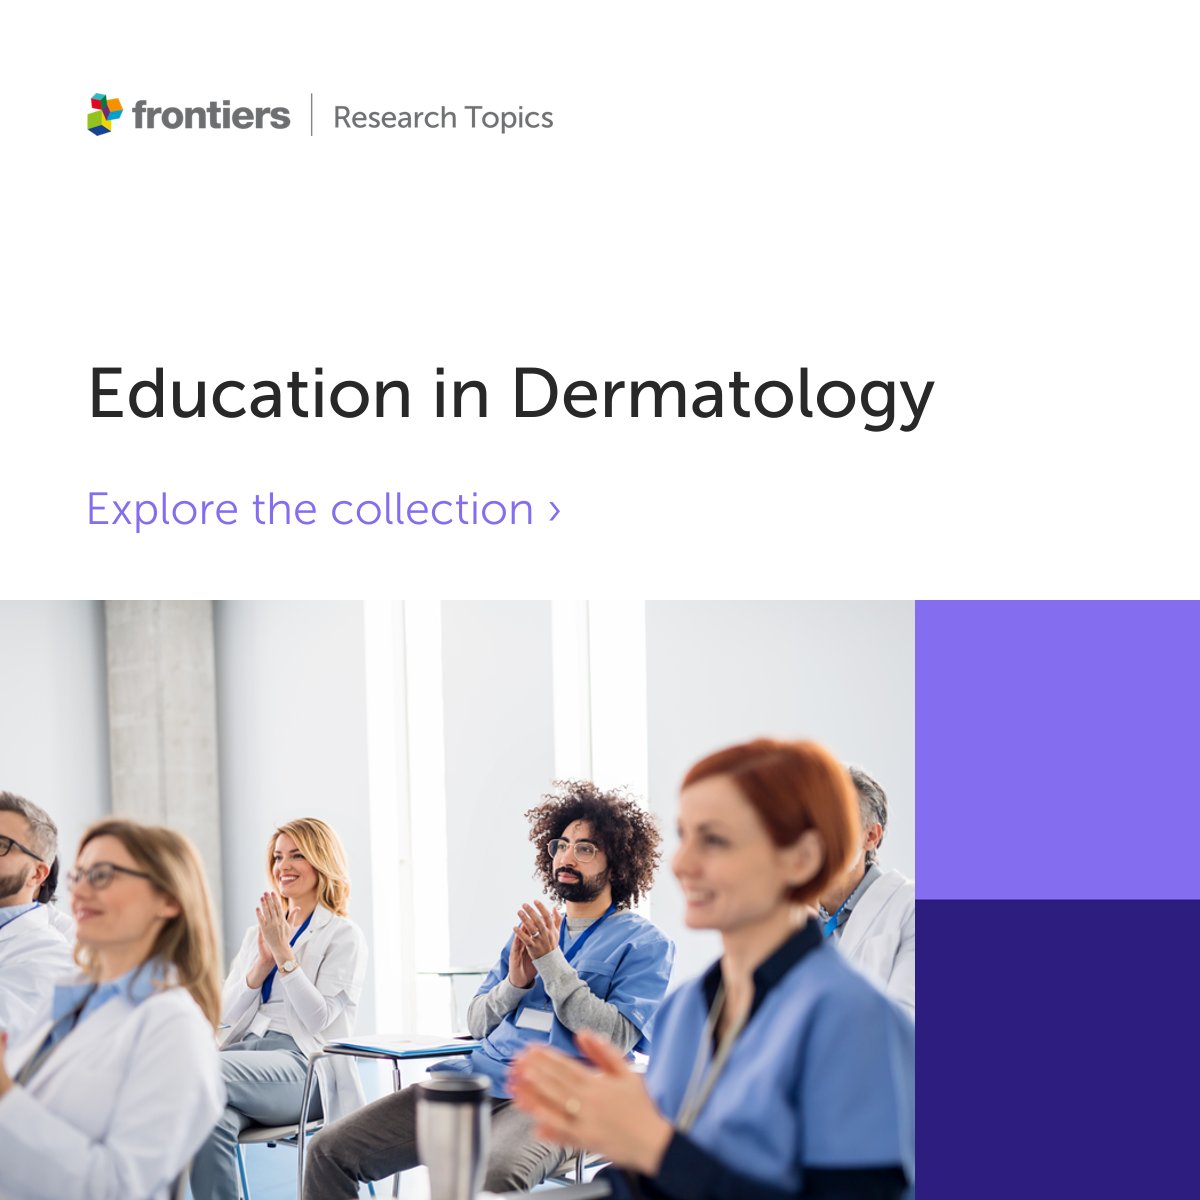 Proudly presenting the new article collection 'Education in Dermatology' 🎉 Edited by Salvador Arias-Santiago, Alejandro Molina Leyva, and Ricardo Vieira Explore the collection 👉 fro.ntiers.in/dN9z